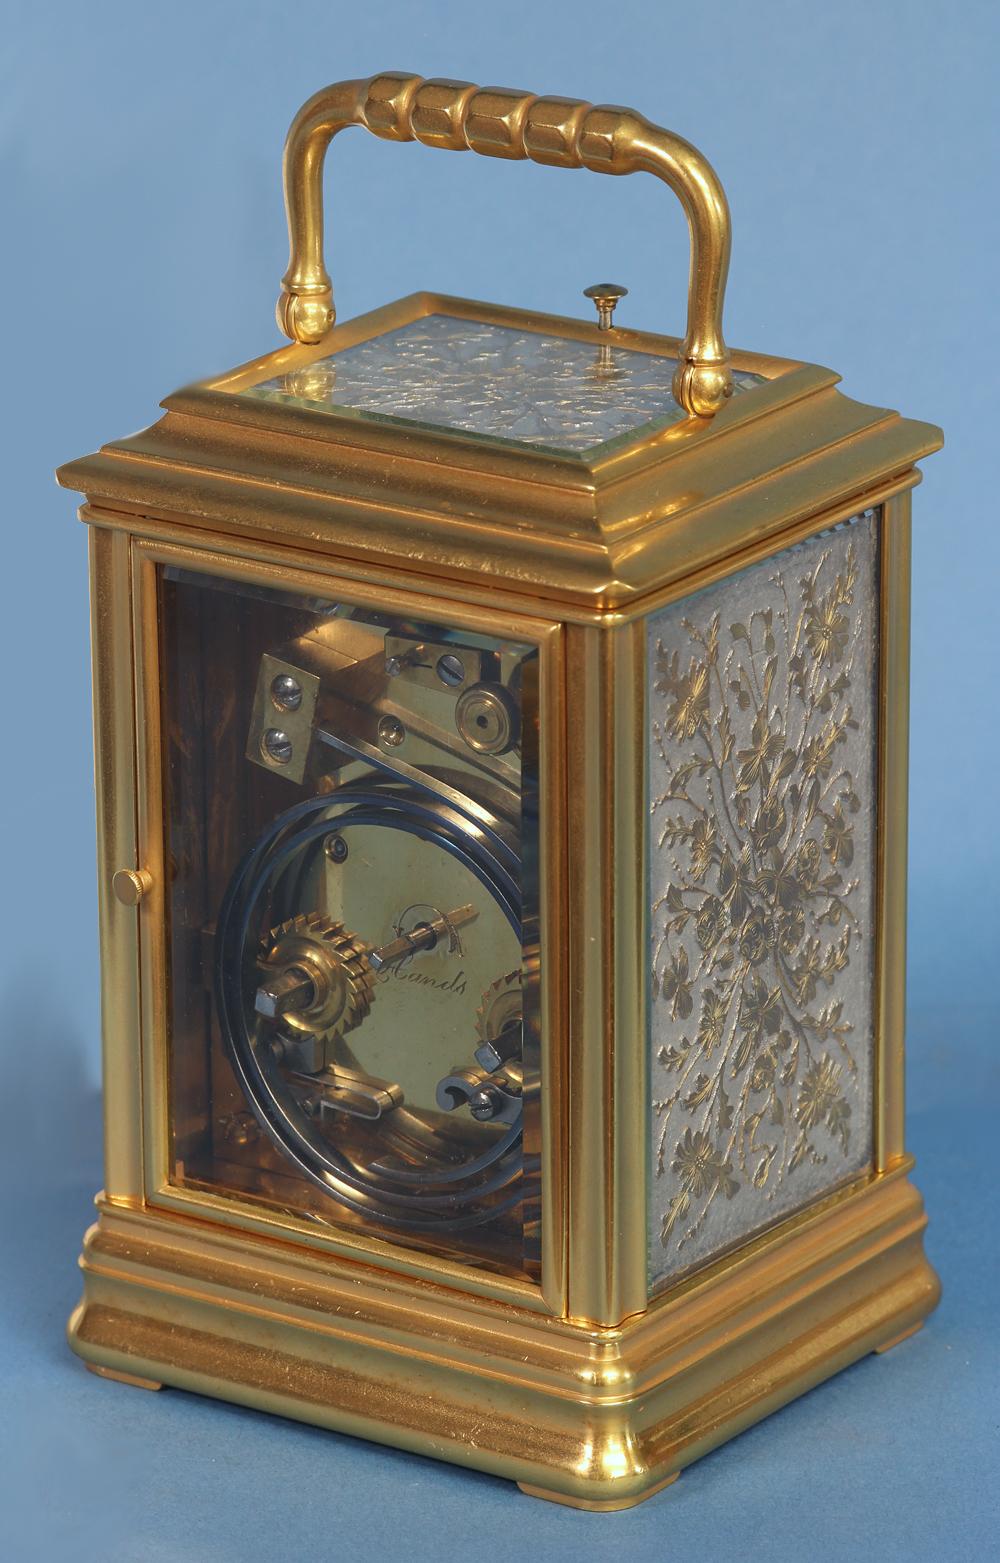 English c.1895 French Carriage Clock with Decorative Metal Panels